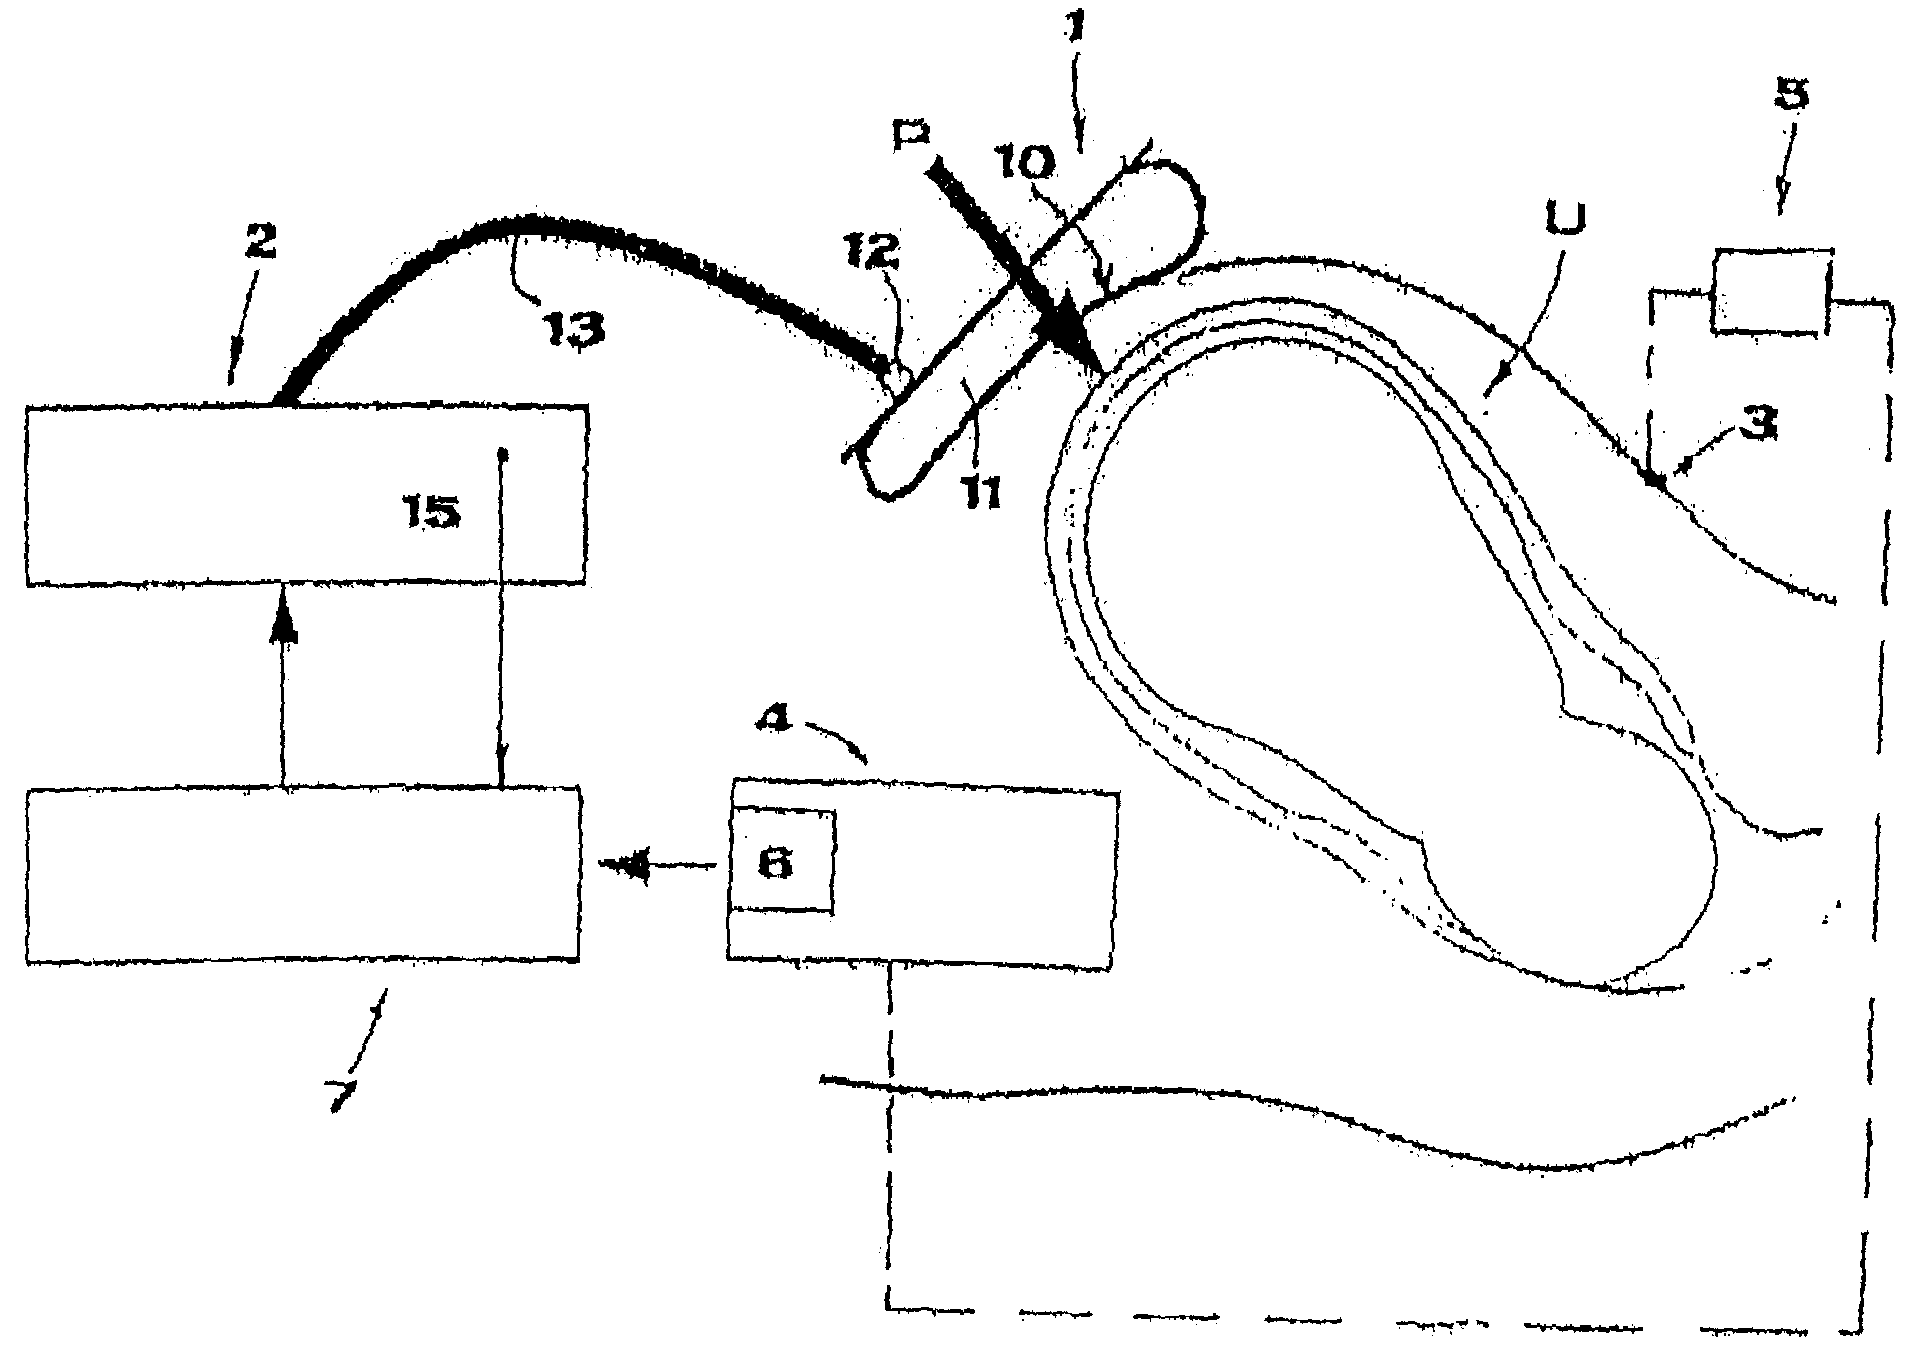 Automatic apparatus for controlling the childbirth labor